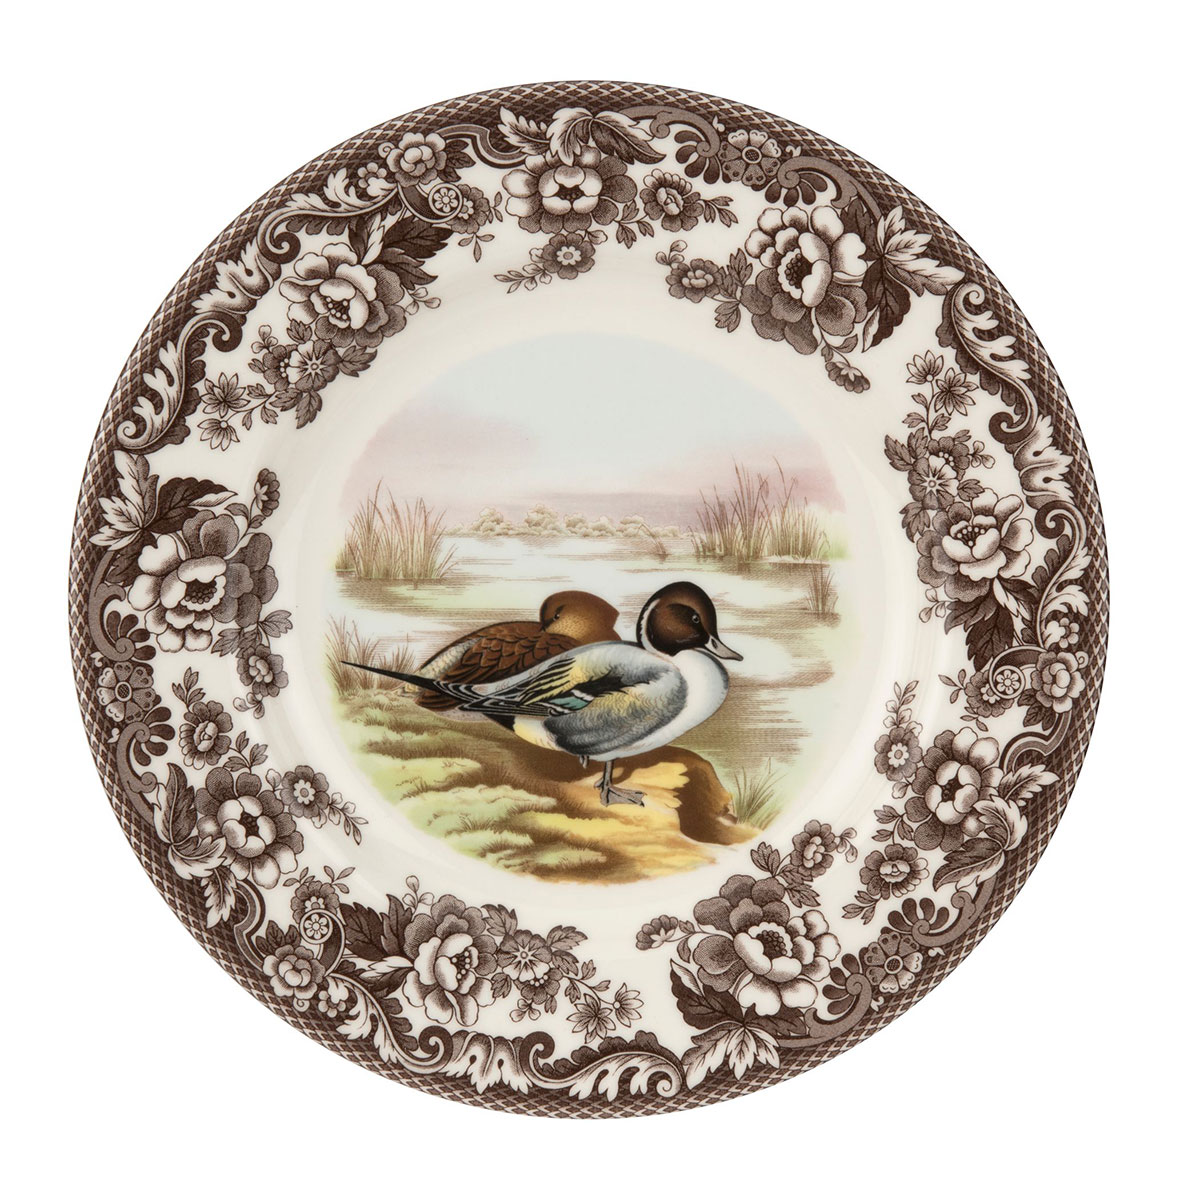 Spode Woodland Dinner Plate, Pintail